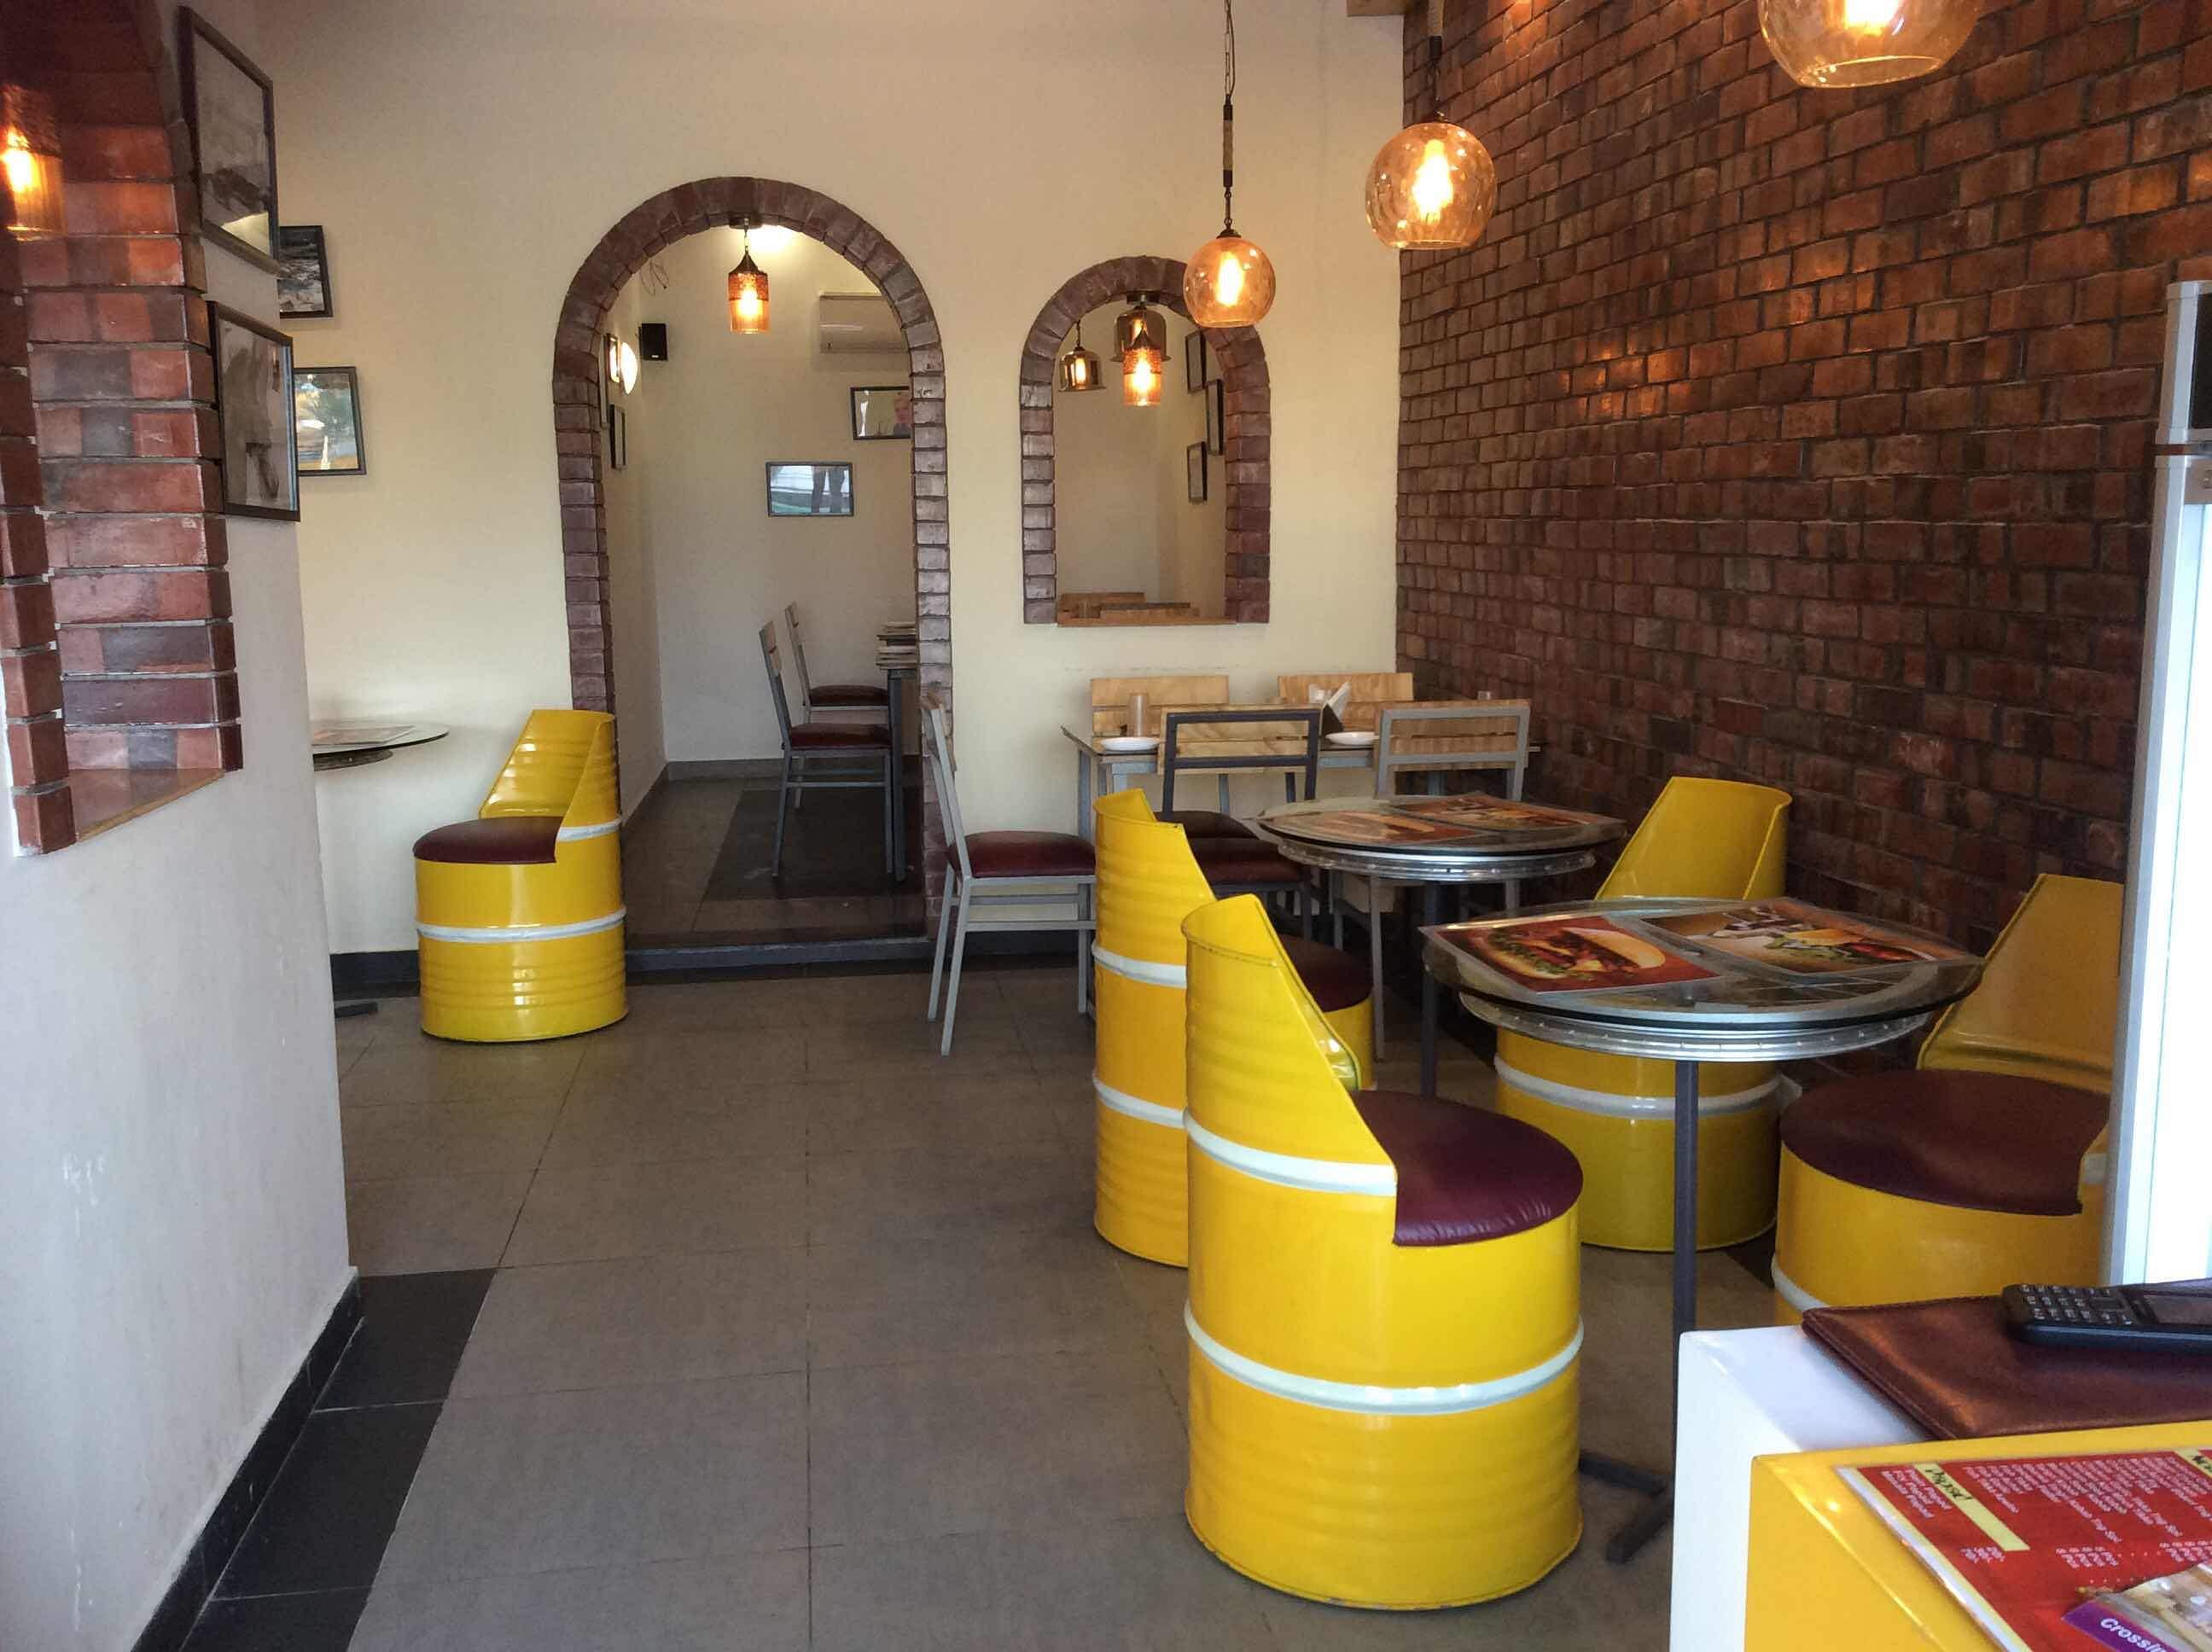 TNG Restaurant And Banquets in NH 24, Ghaziabad